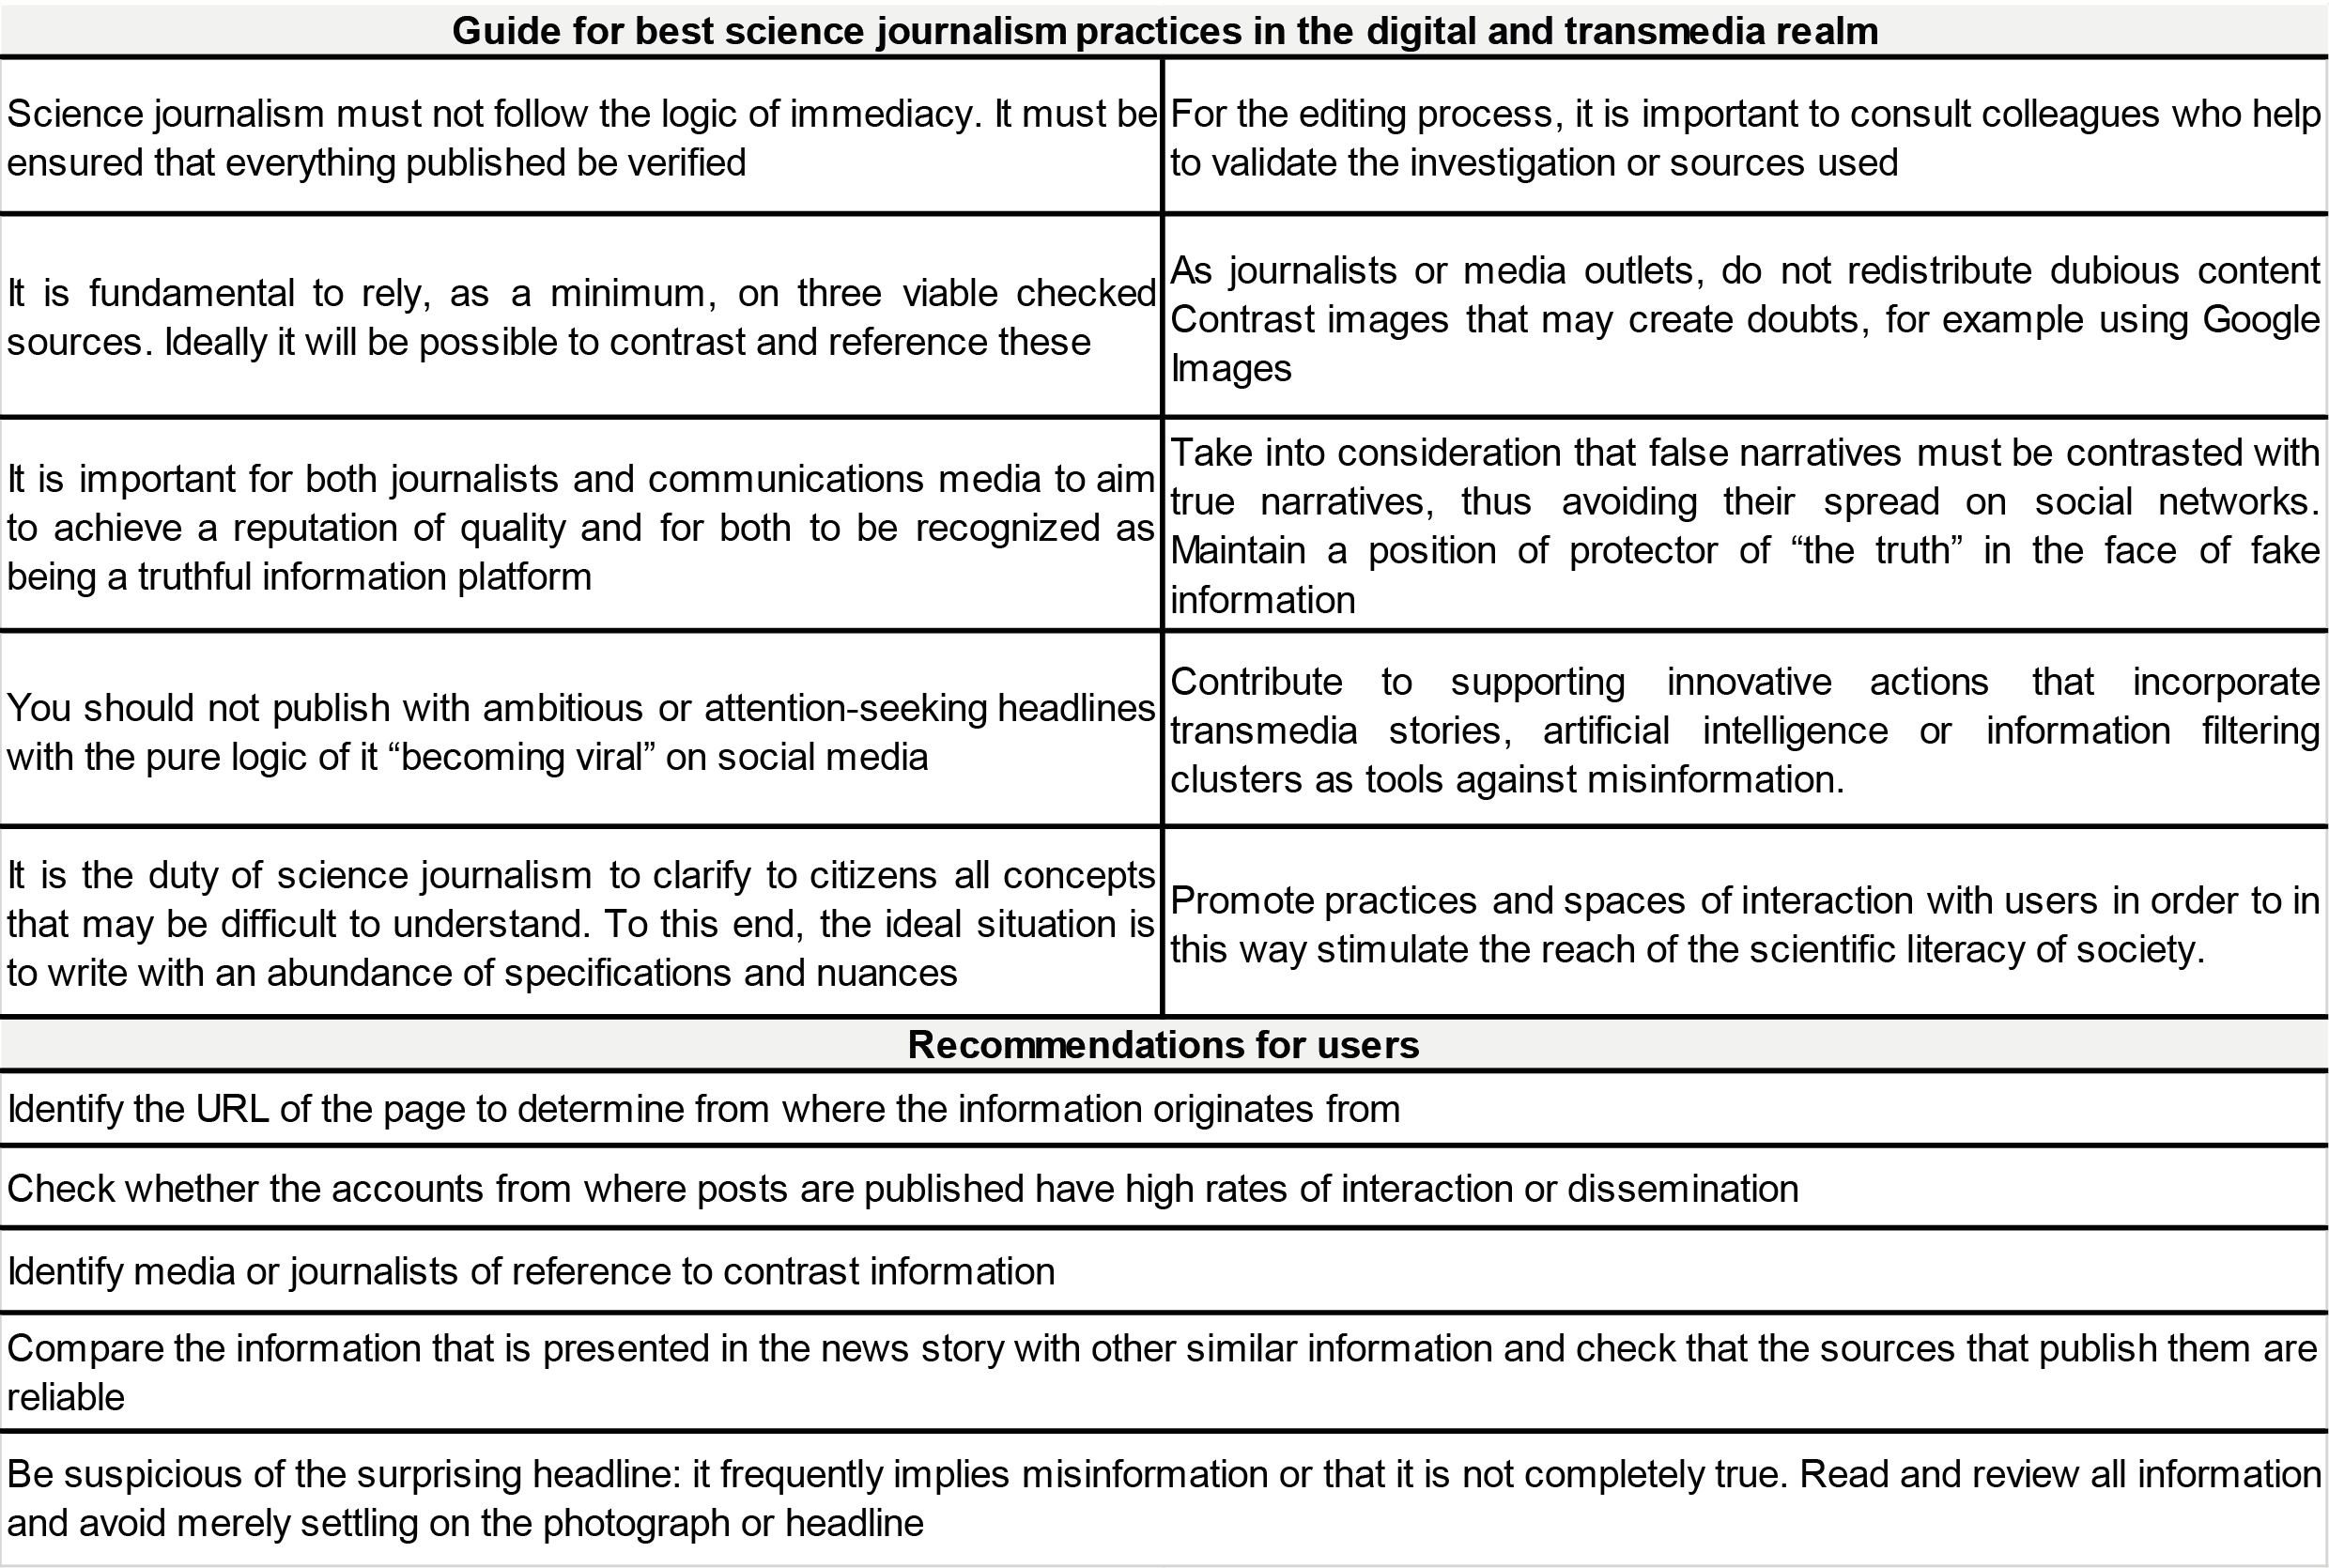 Summary of recommendations for the development of science journalism in the digital realm